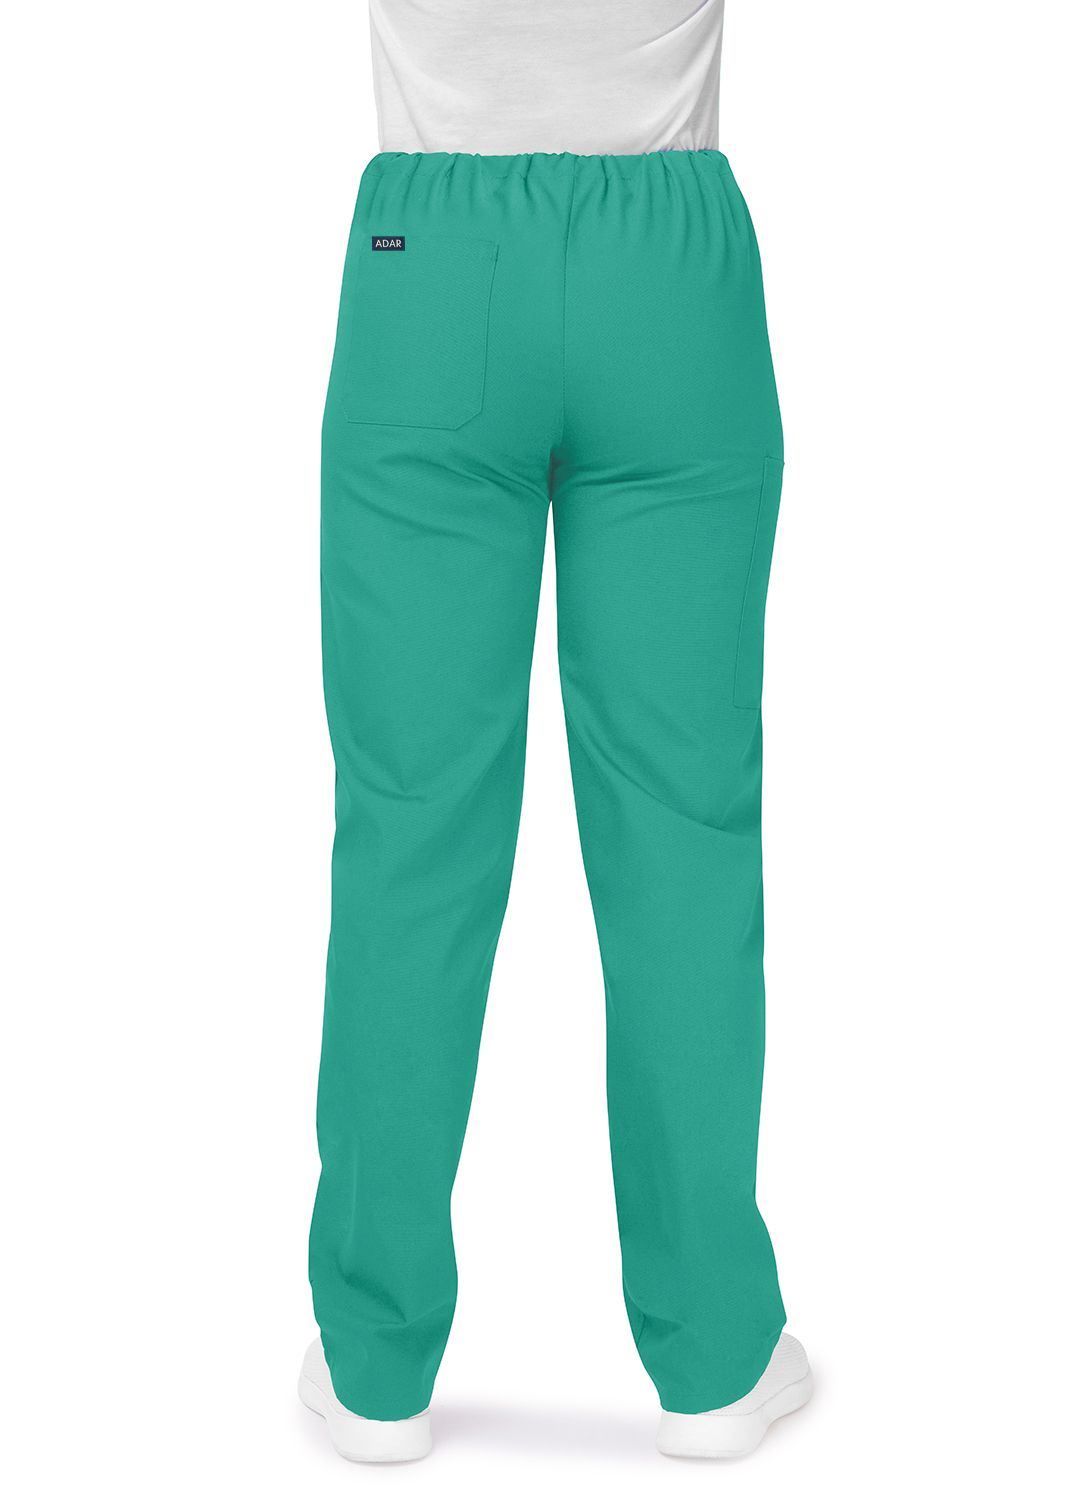 Unisex Drawstring Pants by Adar XS-5X / Surgical Green